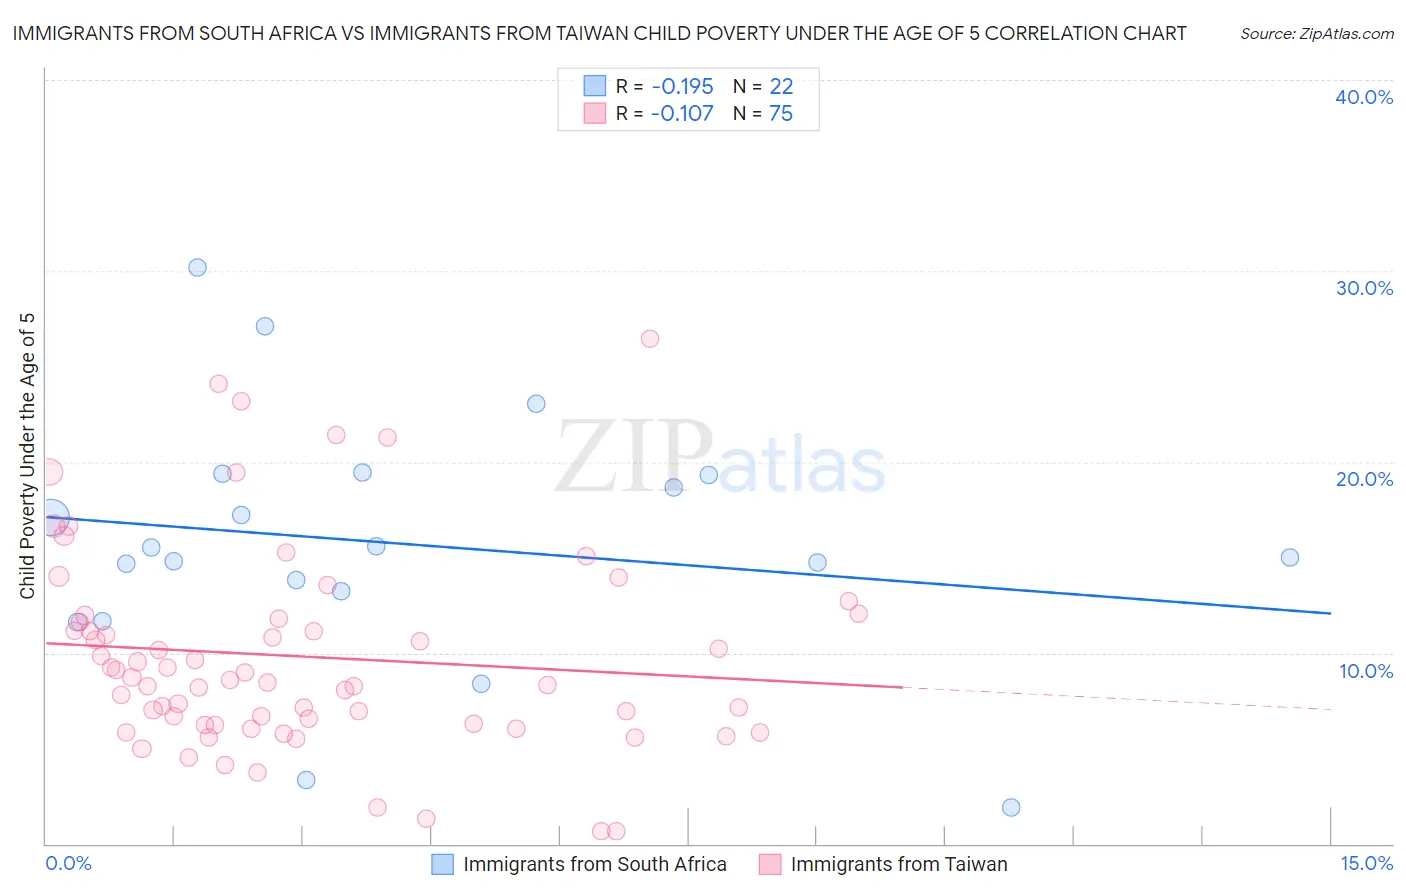 Immigrants from South Africa vs Immigrants from Taiwan Child Poverty Under the Age of 5